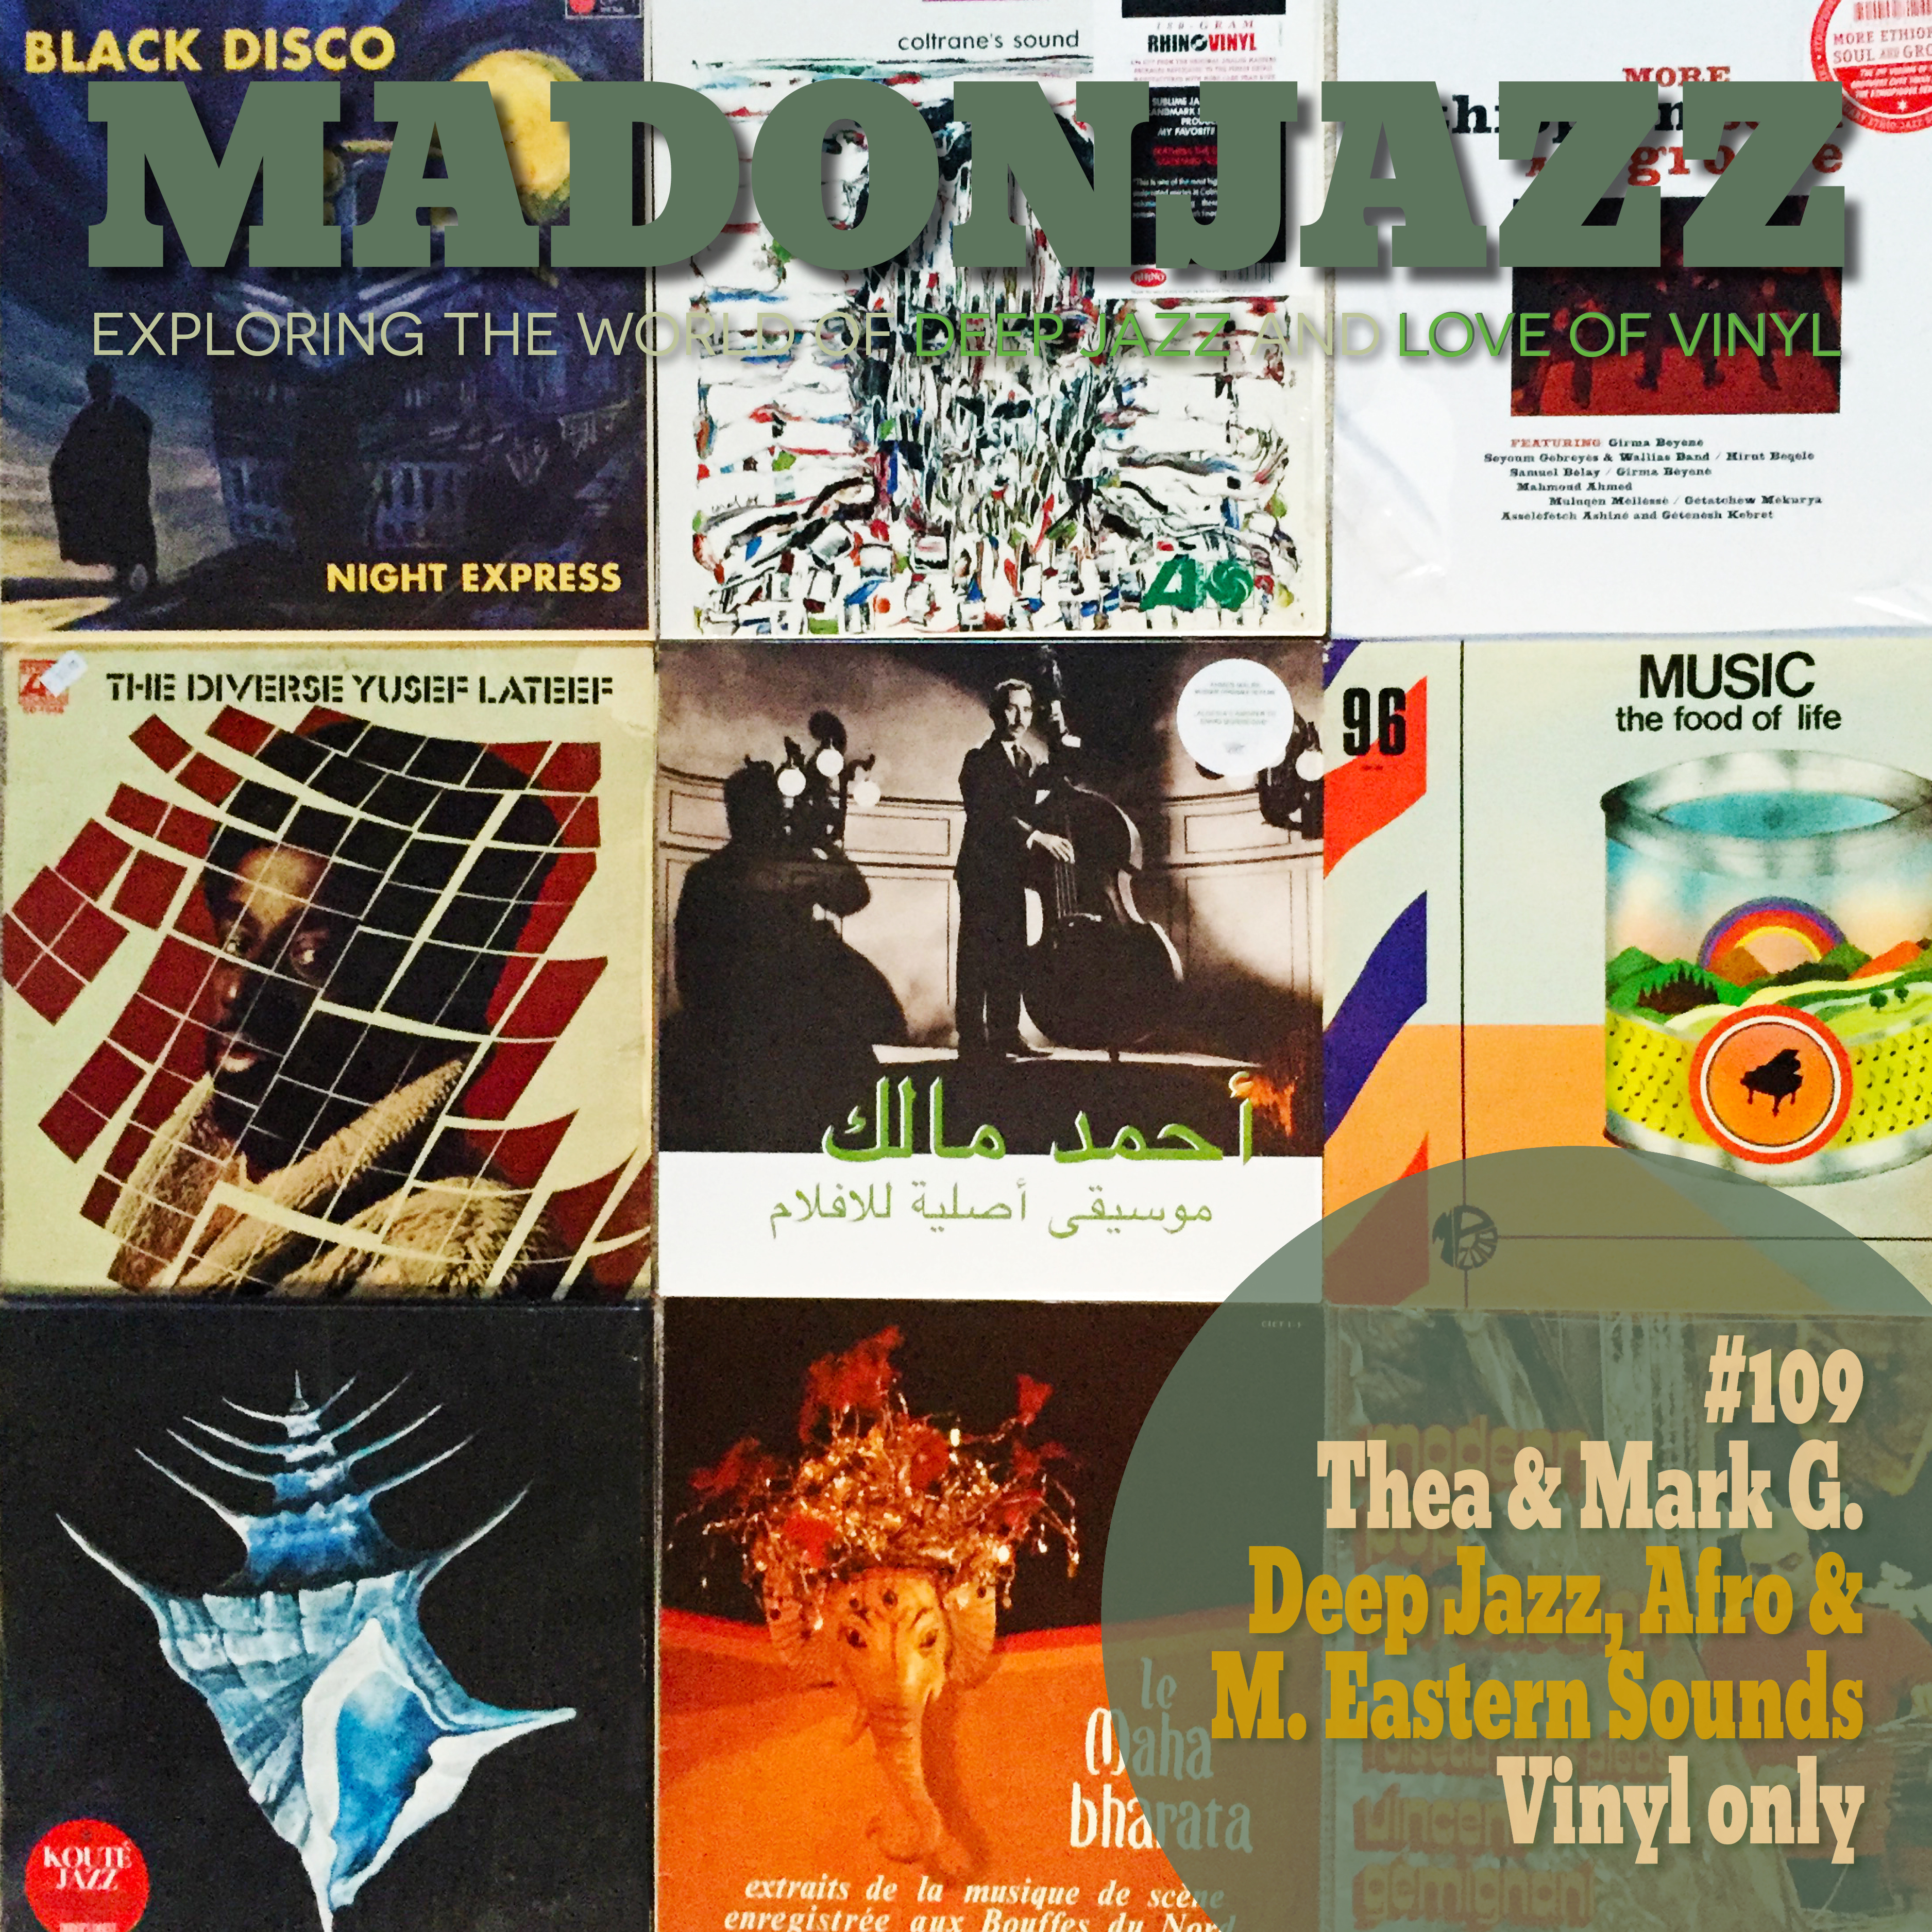 MADONJAZZ #109: Deep Jazz , Afro & Middle Eastern Sounds w/ Thea & Mark G.